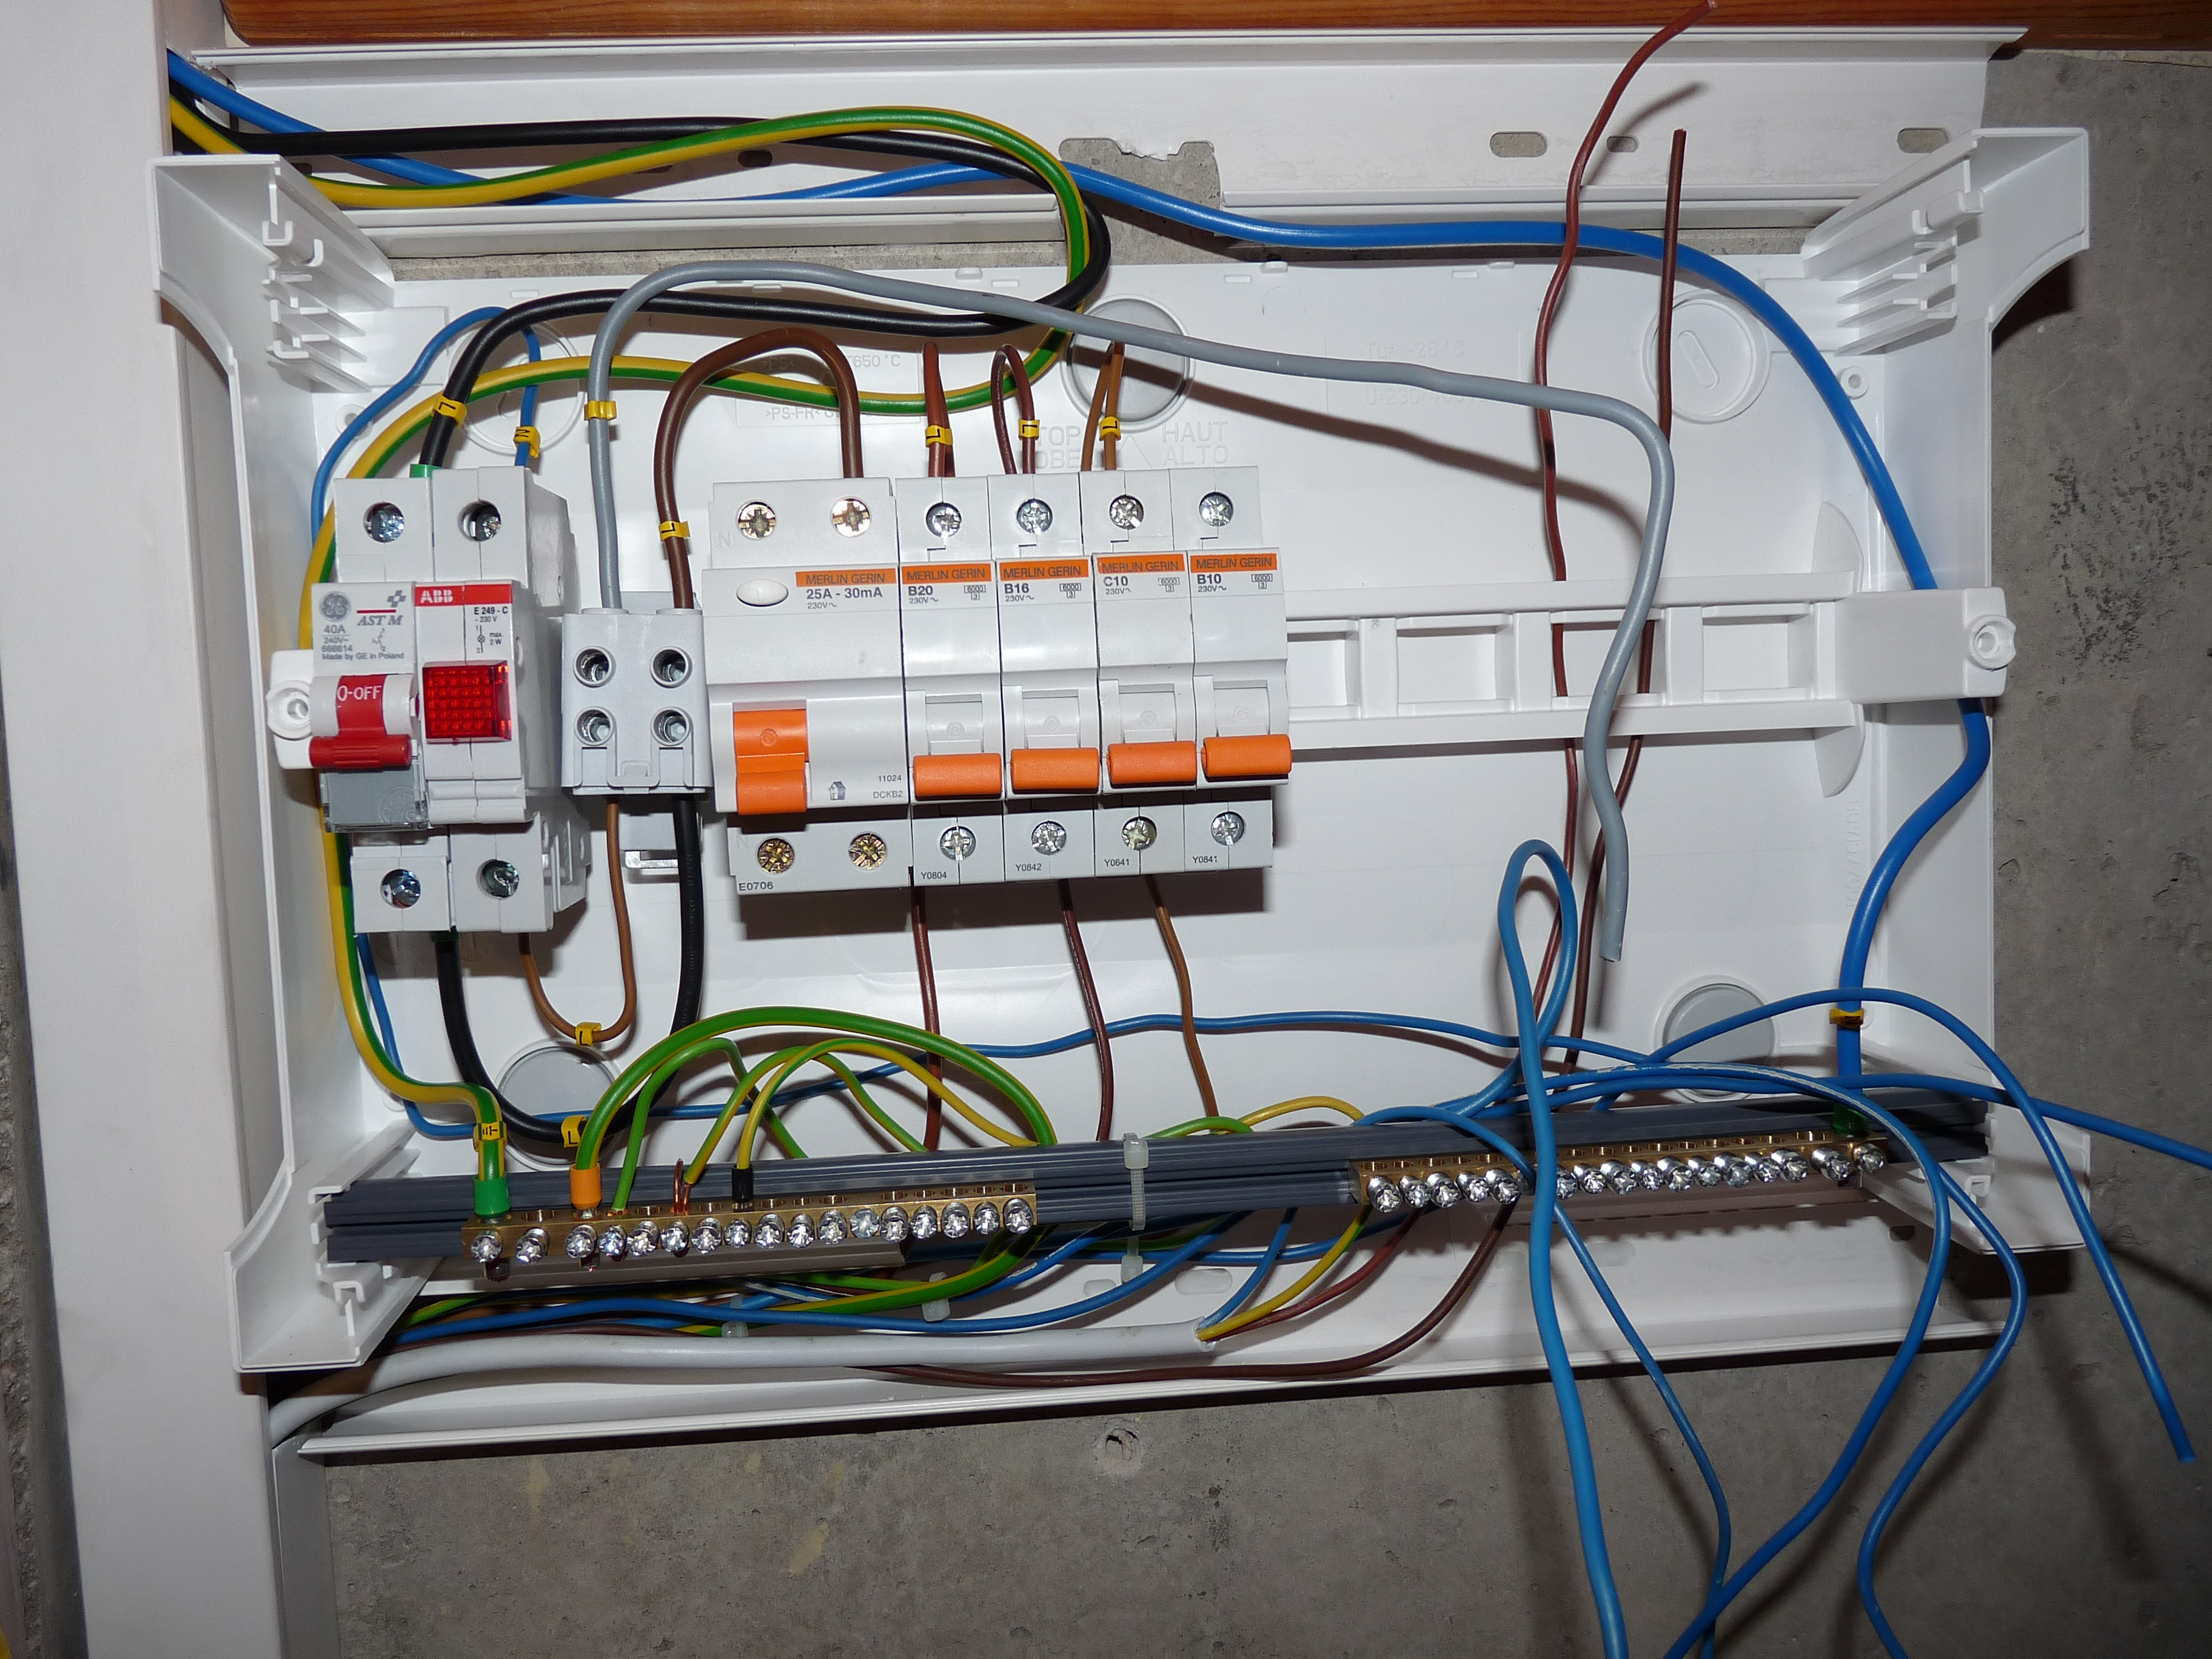 Home Fuse Box Wiring - Data Wiring Diagram Schematic - Electrical Circuit Diagram House Wiring